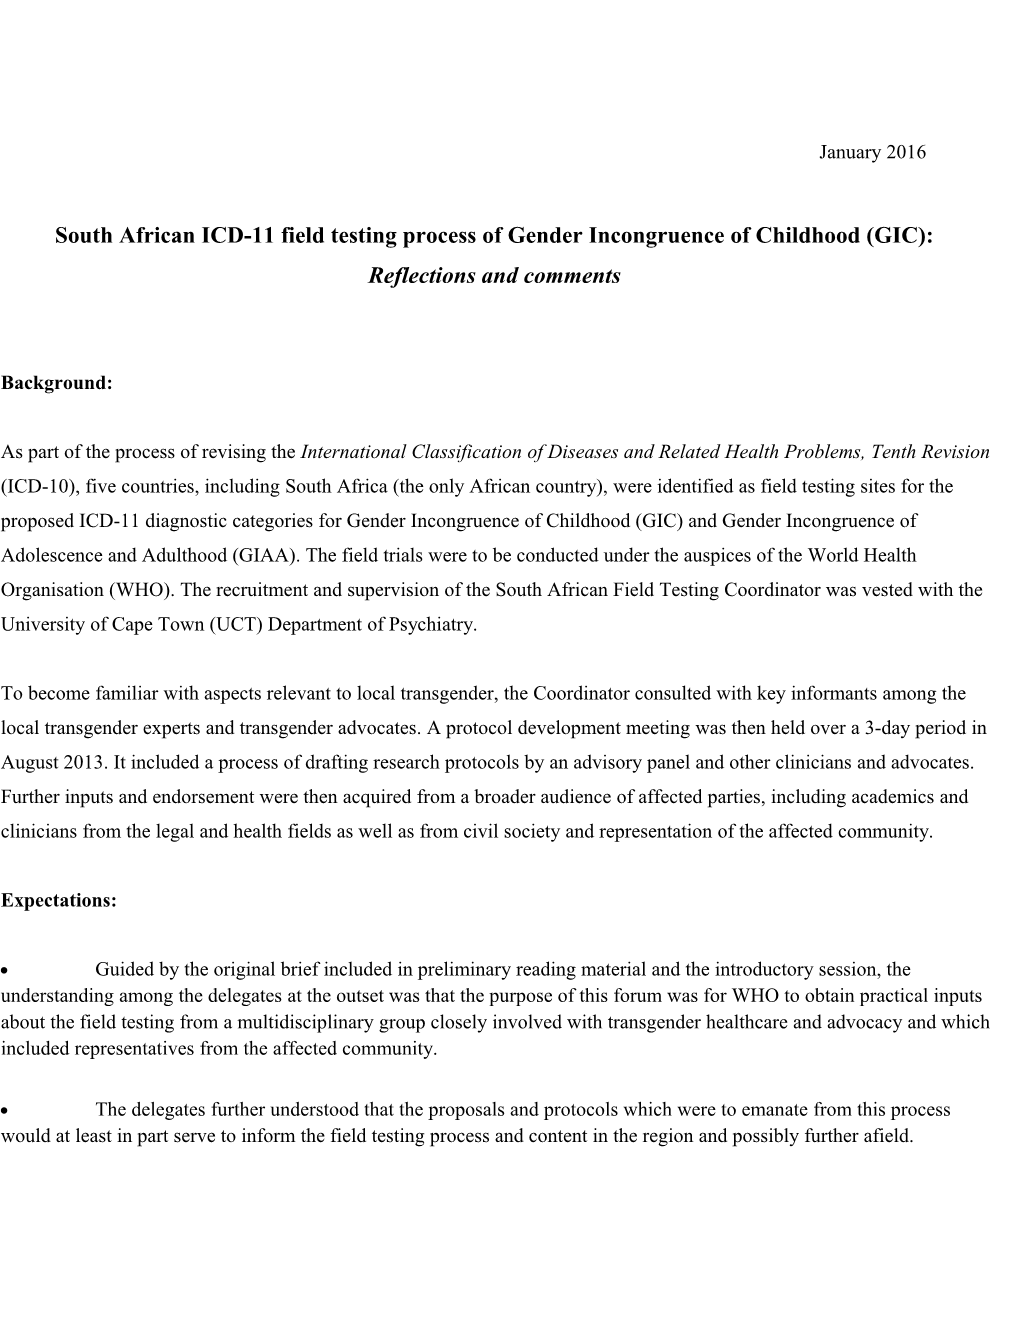 South African ICD-11 Field Testing Process of Gender Incongruence of Childhood (GIC)